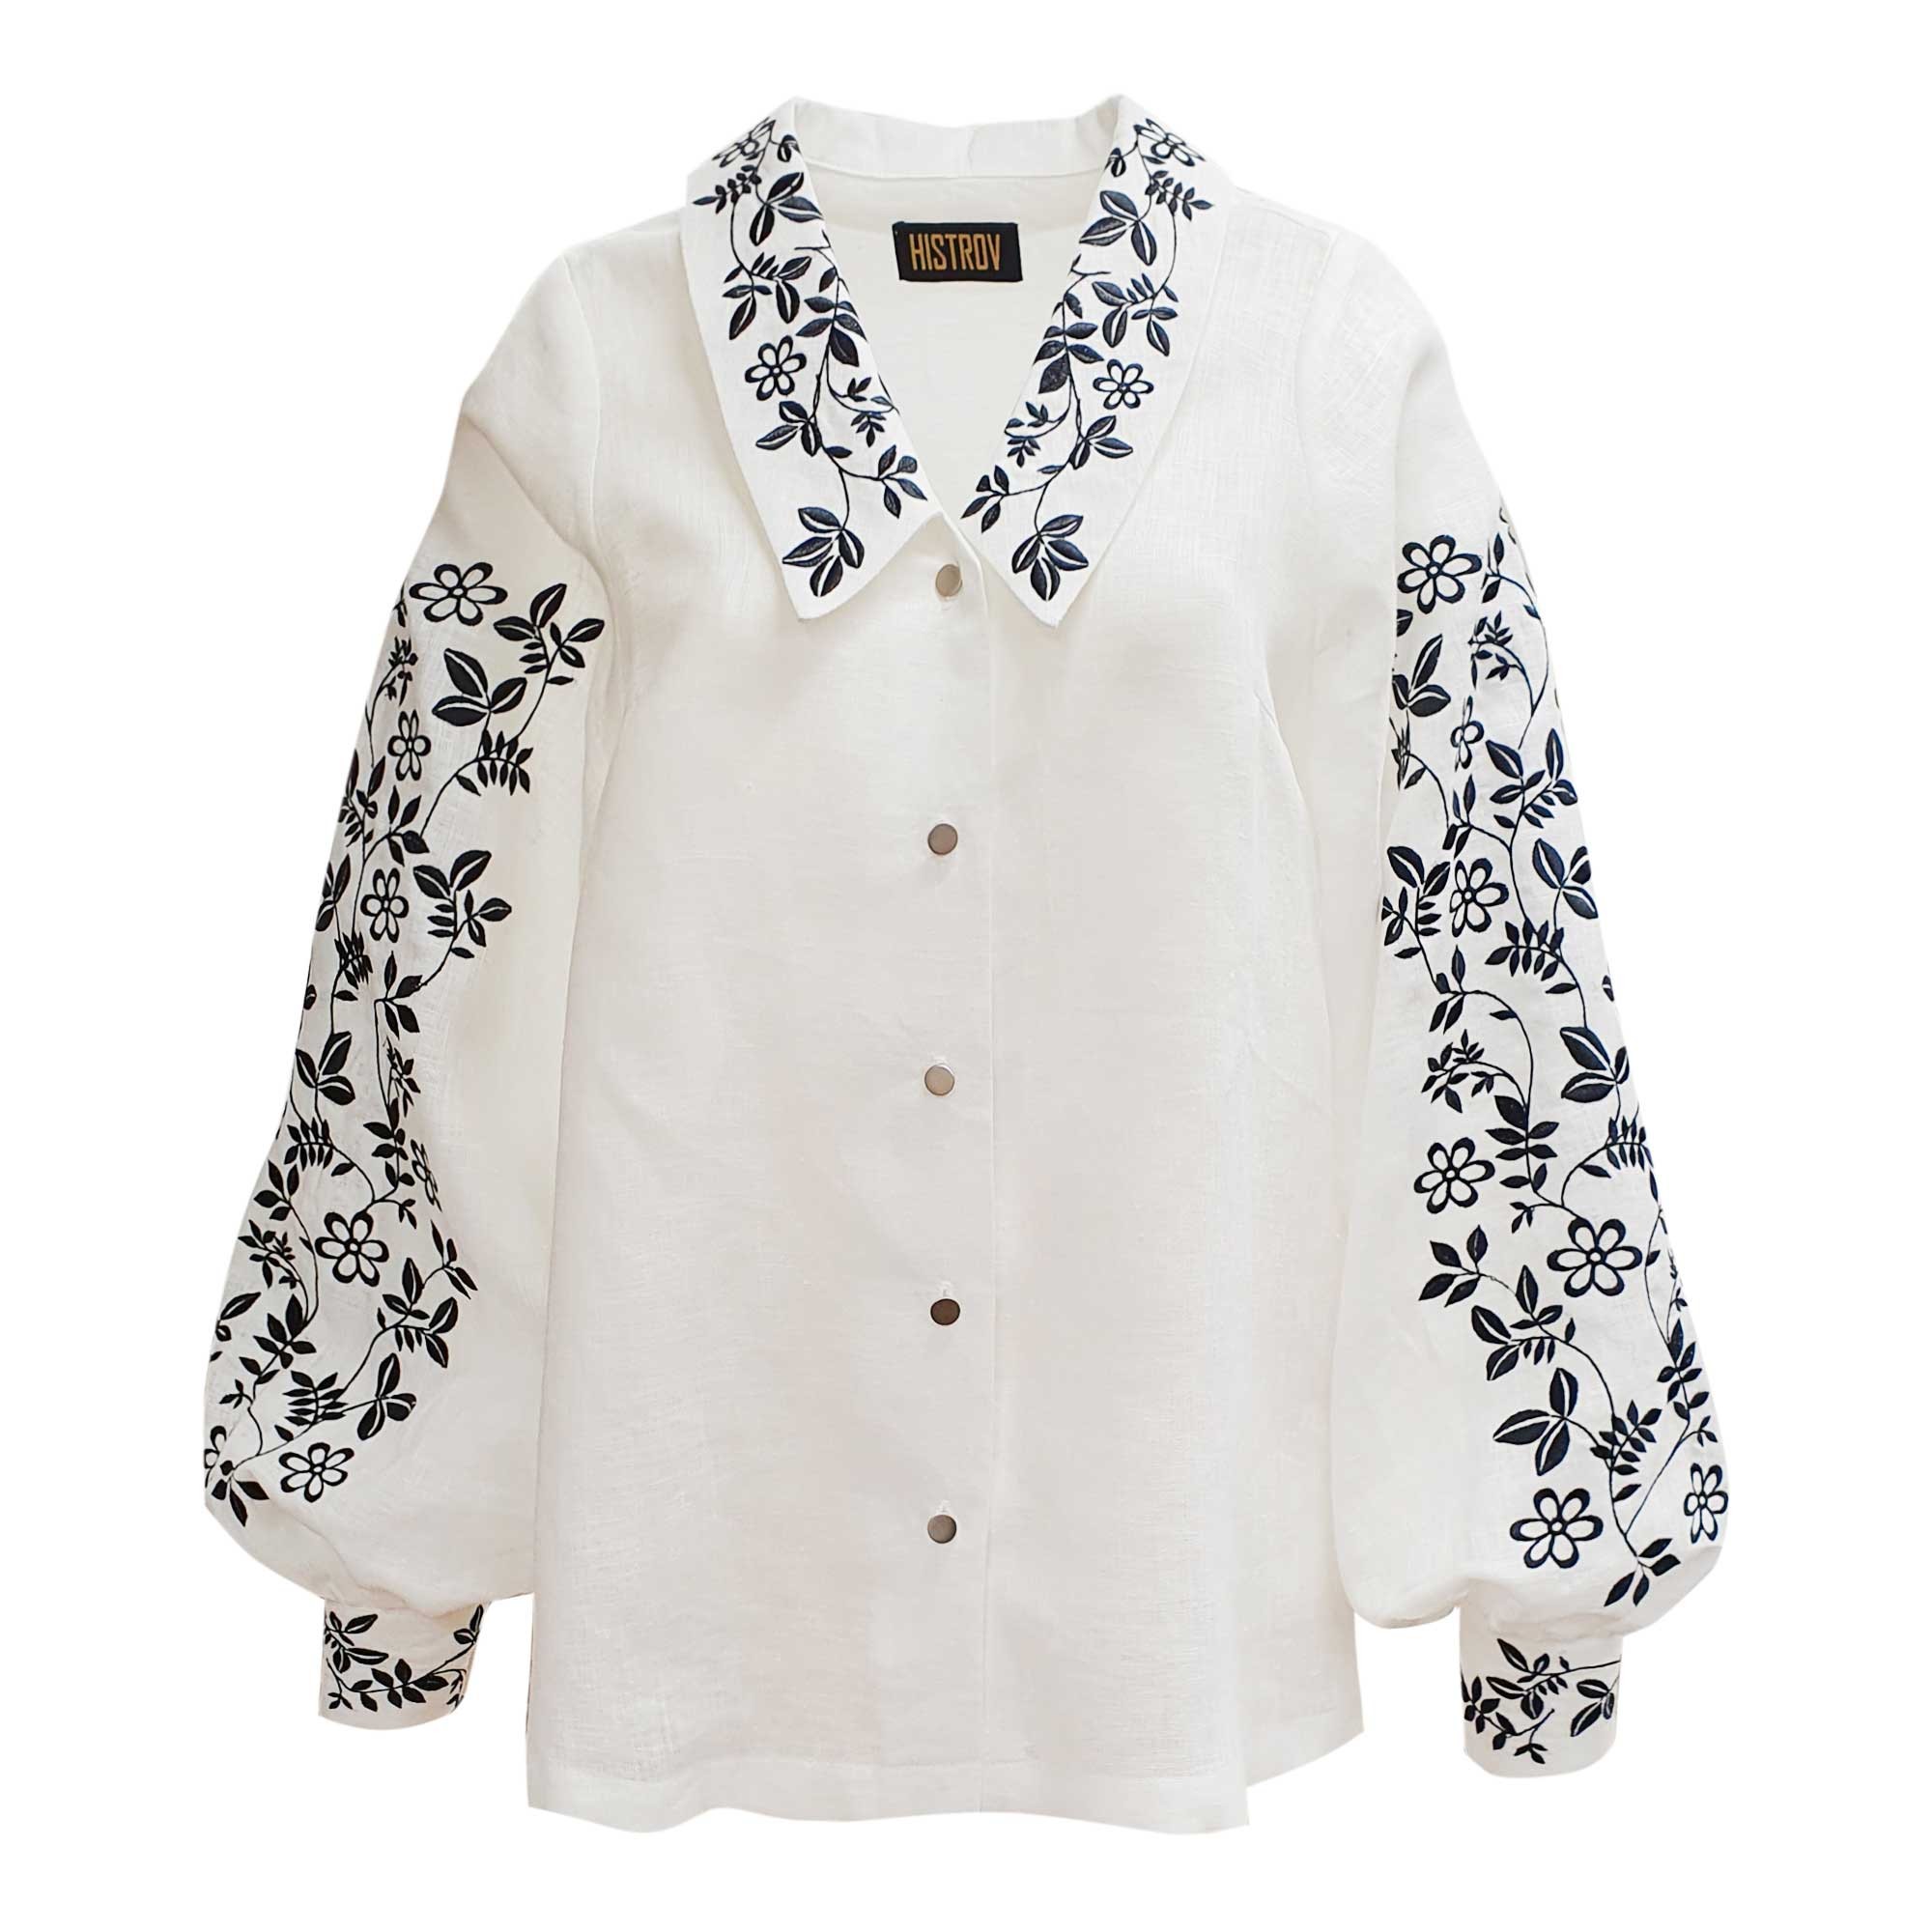 Vyshyvanka shirt with embroidery Floral branches monochrome